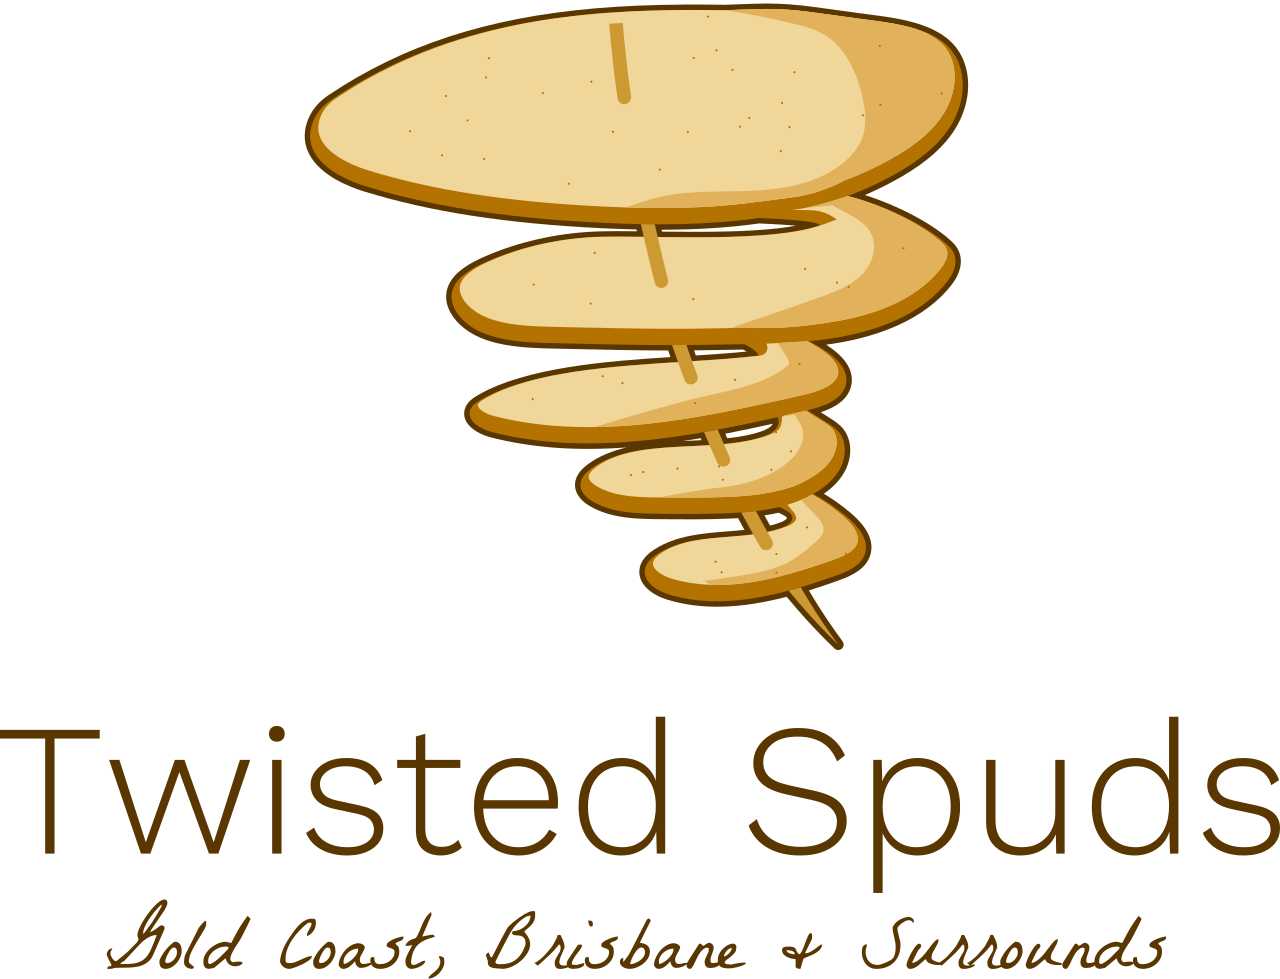 Twisted Spuds's web page